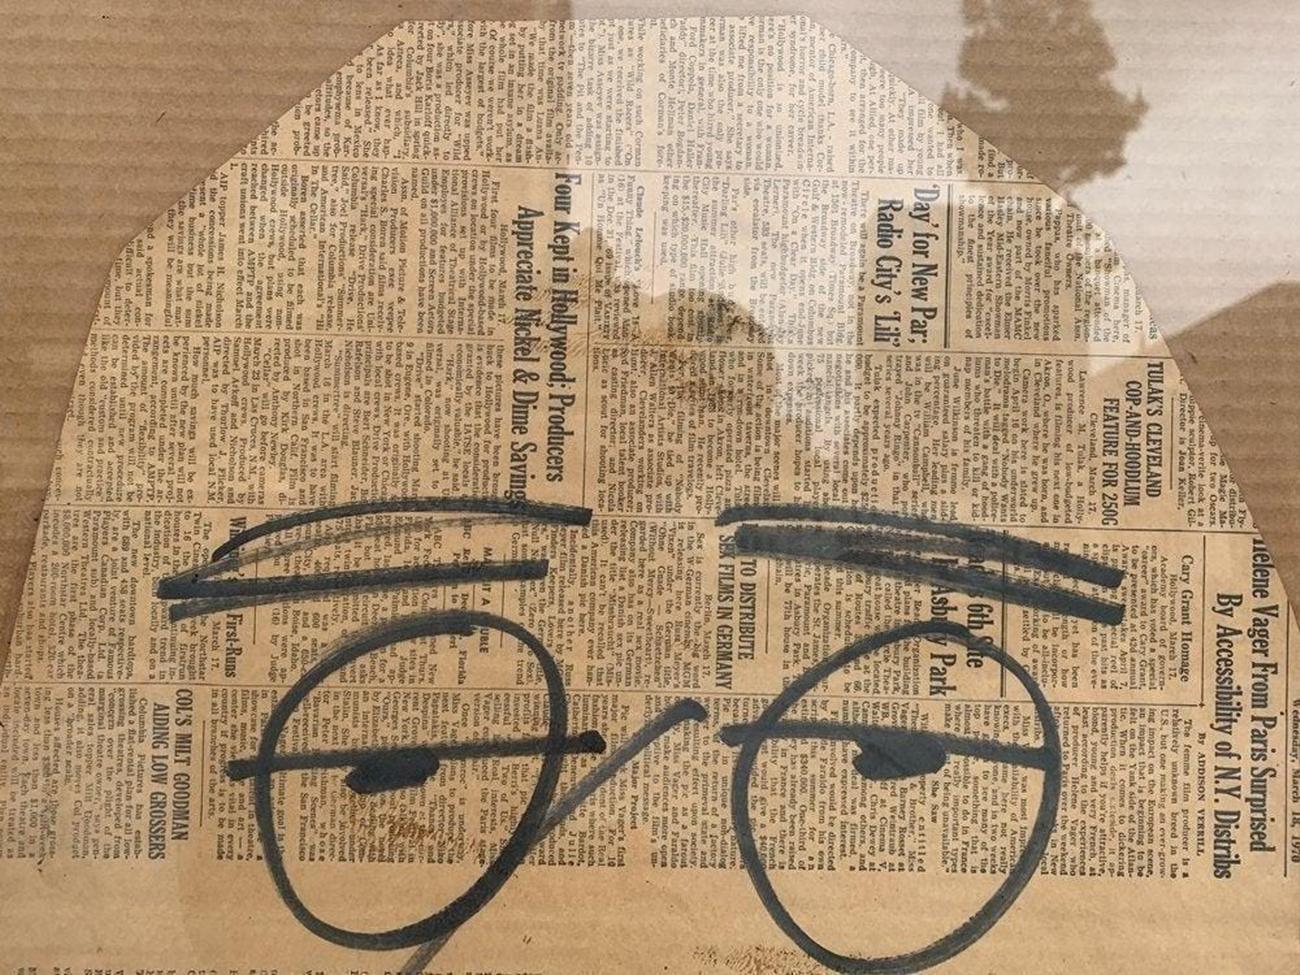 American Vintage Art on Newspaper from 1970 by Ernest Pintoff